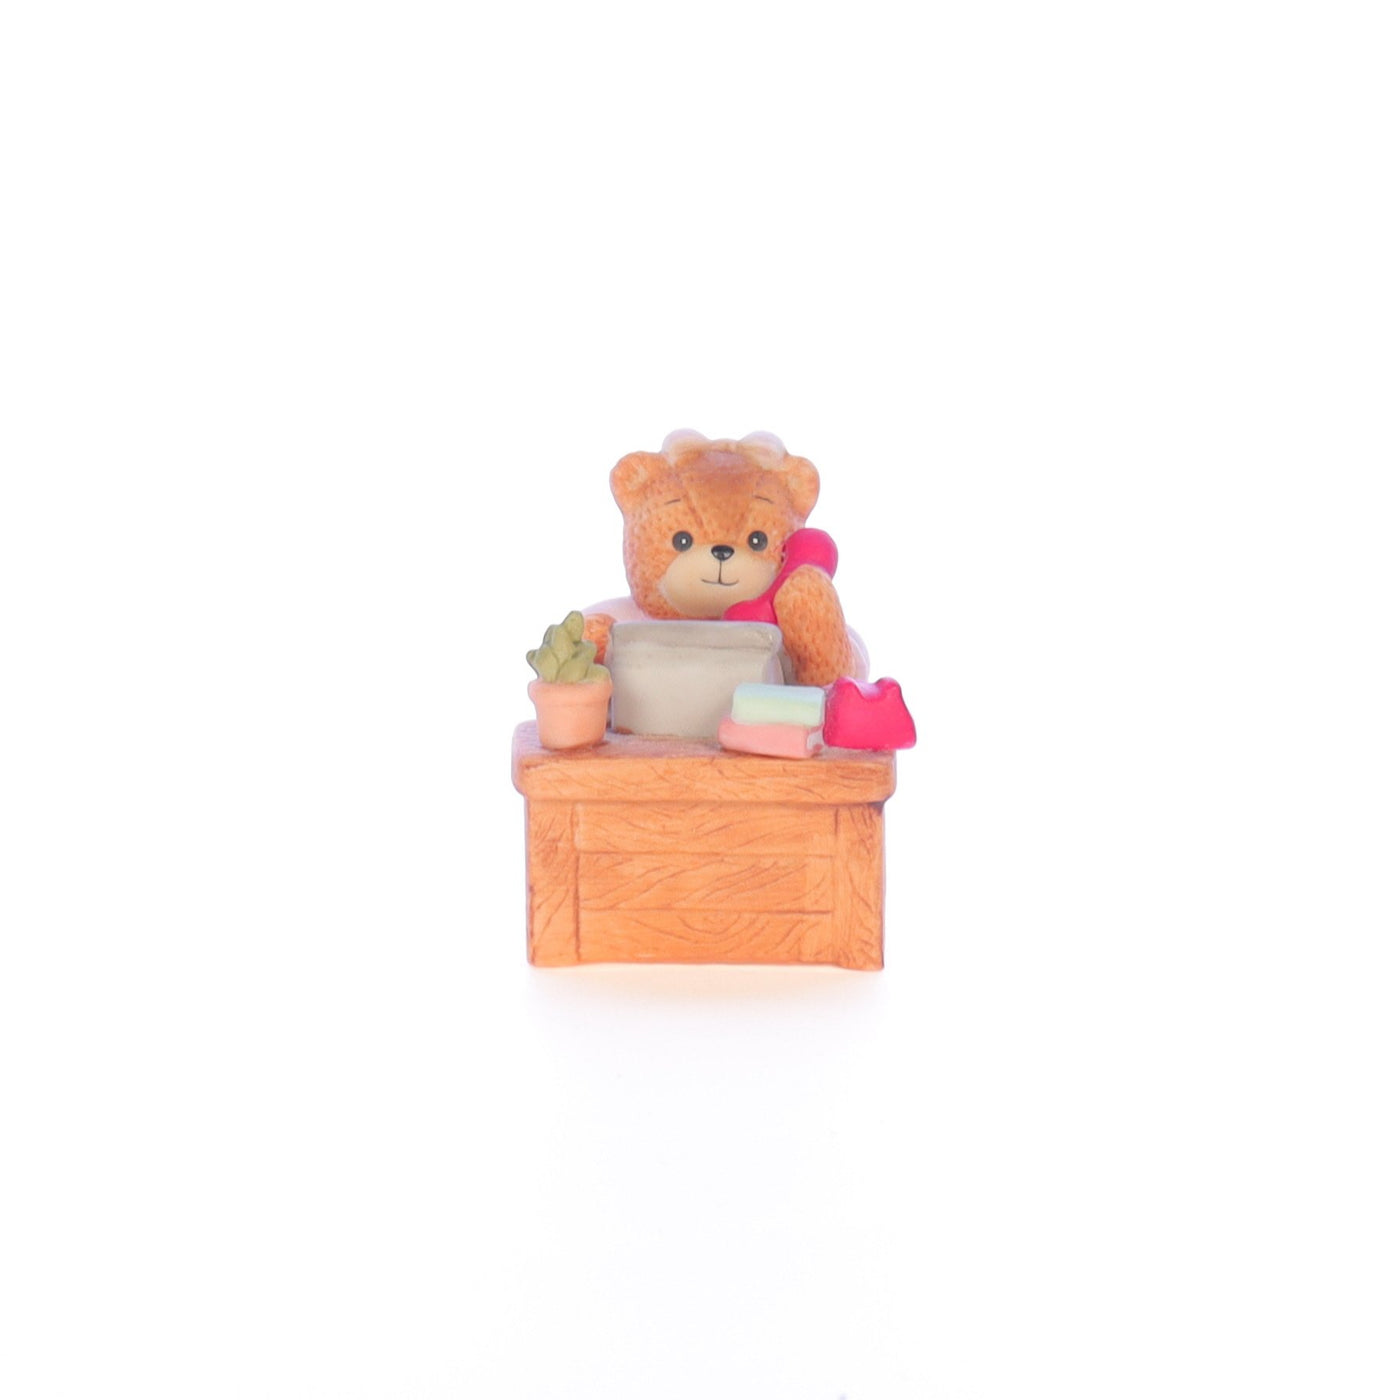 Lucy_And_Me_by_Lucy_Atwell_Porcelain_Figurine_Secretary_Bear_Lucy_Unknown_057_01